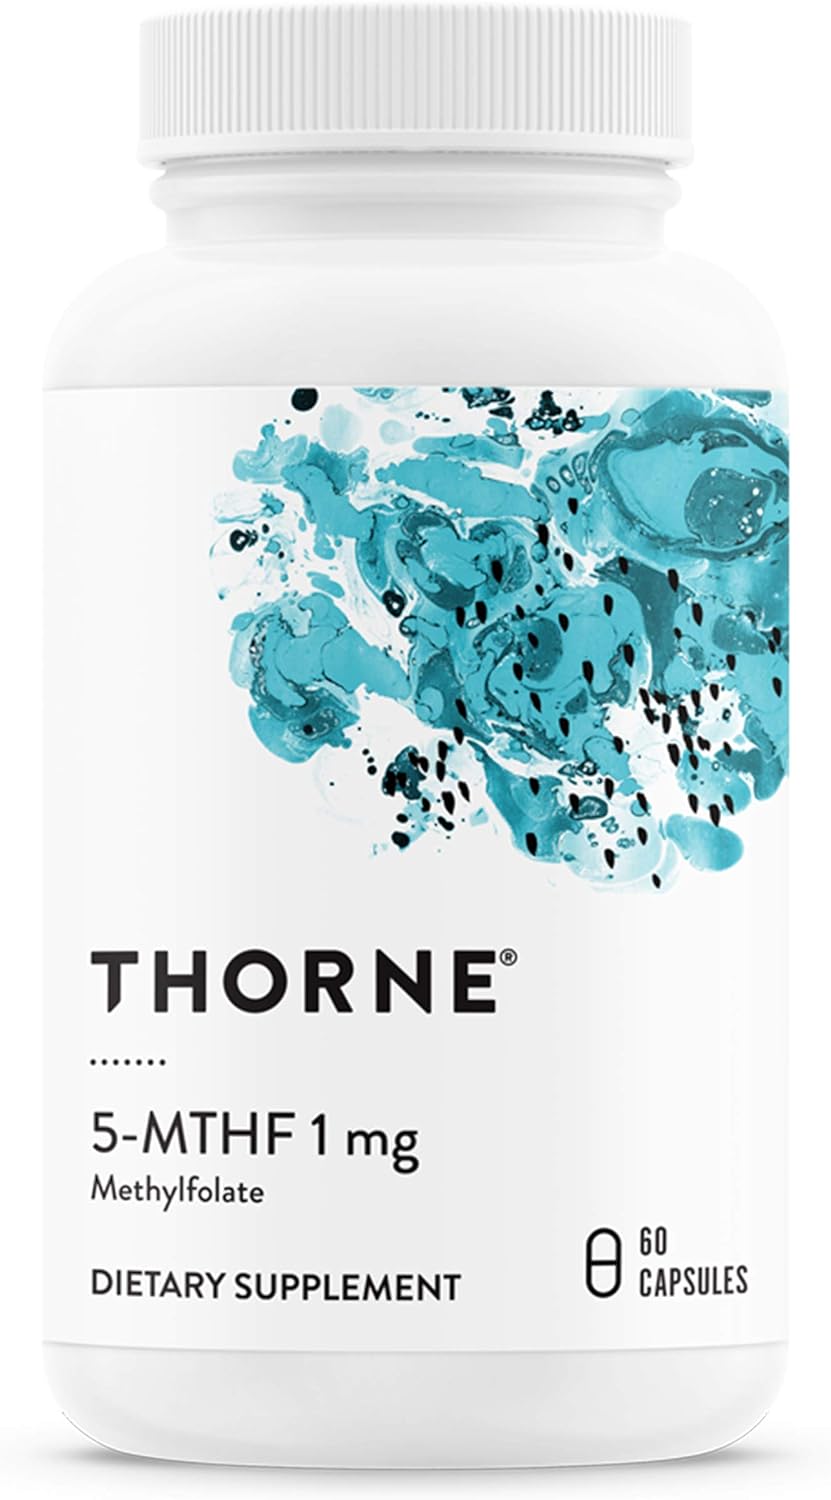 Thorne 5-MTHF 1mg - Methylfolate (Active B9 Folate) Supplement - Suppo